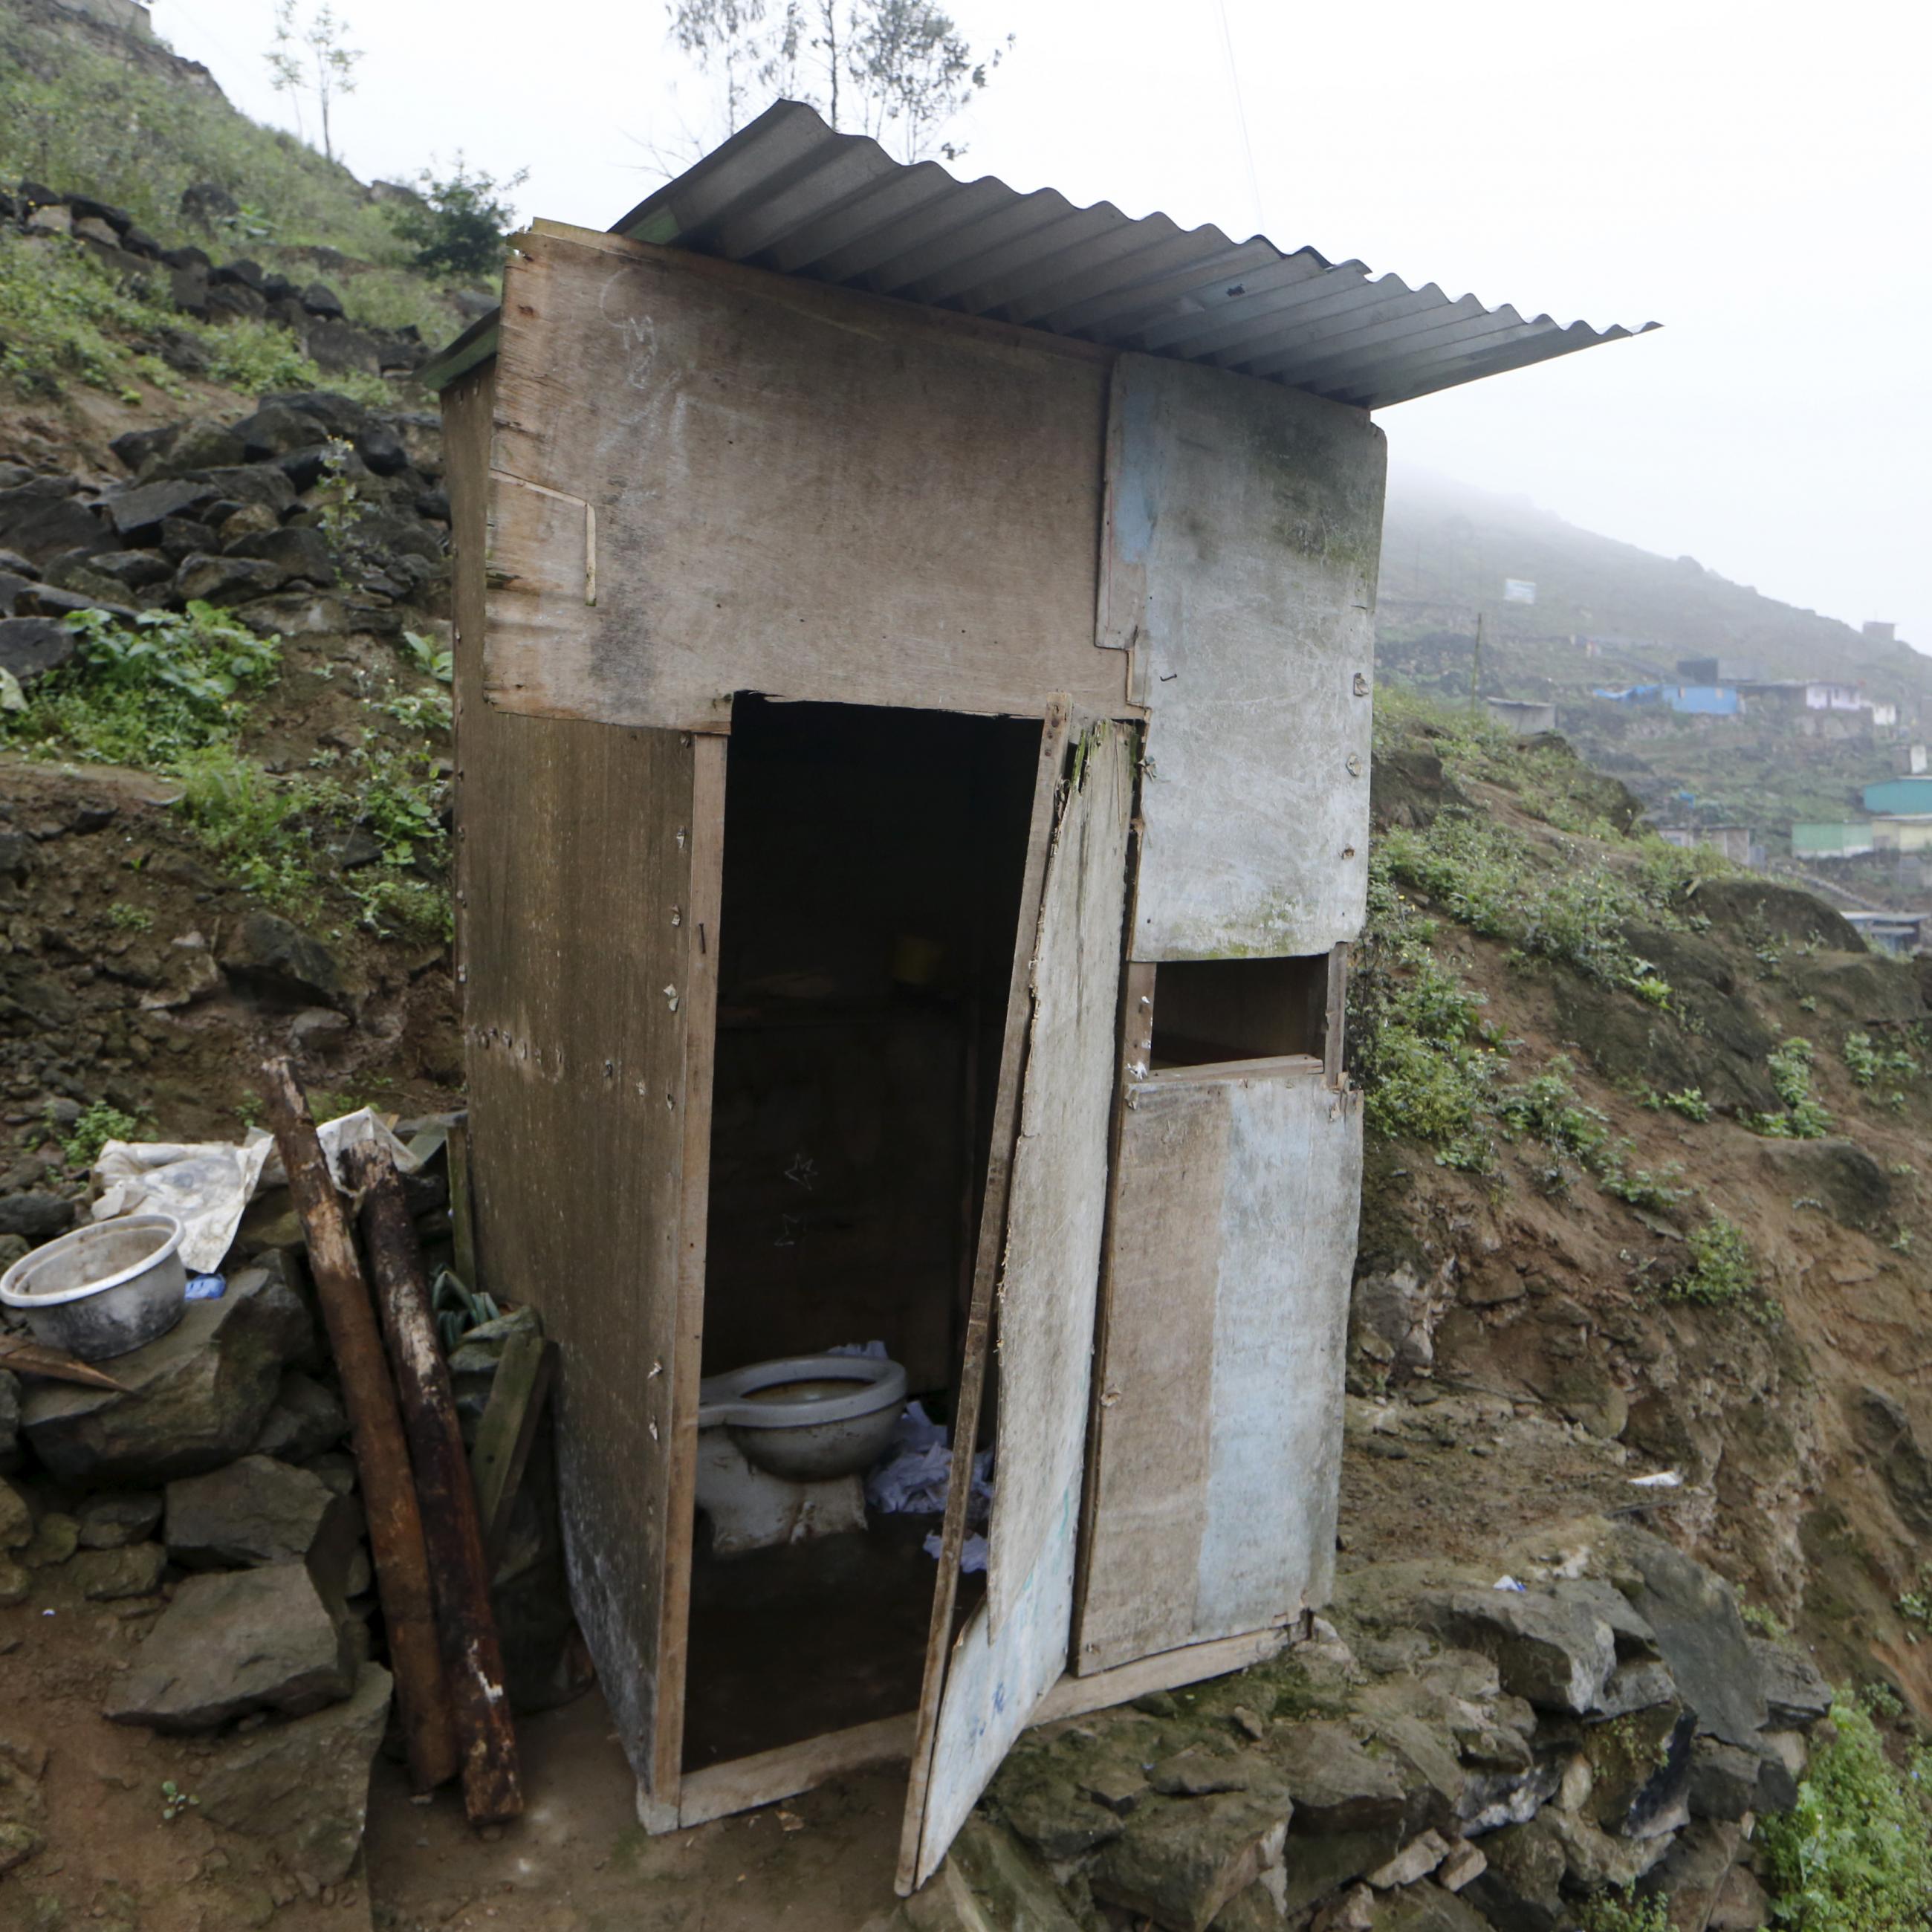 A toilet stands outside the Llamocca family home at Villa Lourdes in Villa Maria del Triunfo on the outskirts of Lima, Peru, October 7, 2015. There is no running water in Villa Lourdes and families buy it from water tankers once a week. 